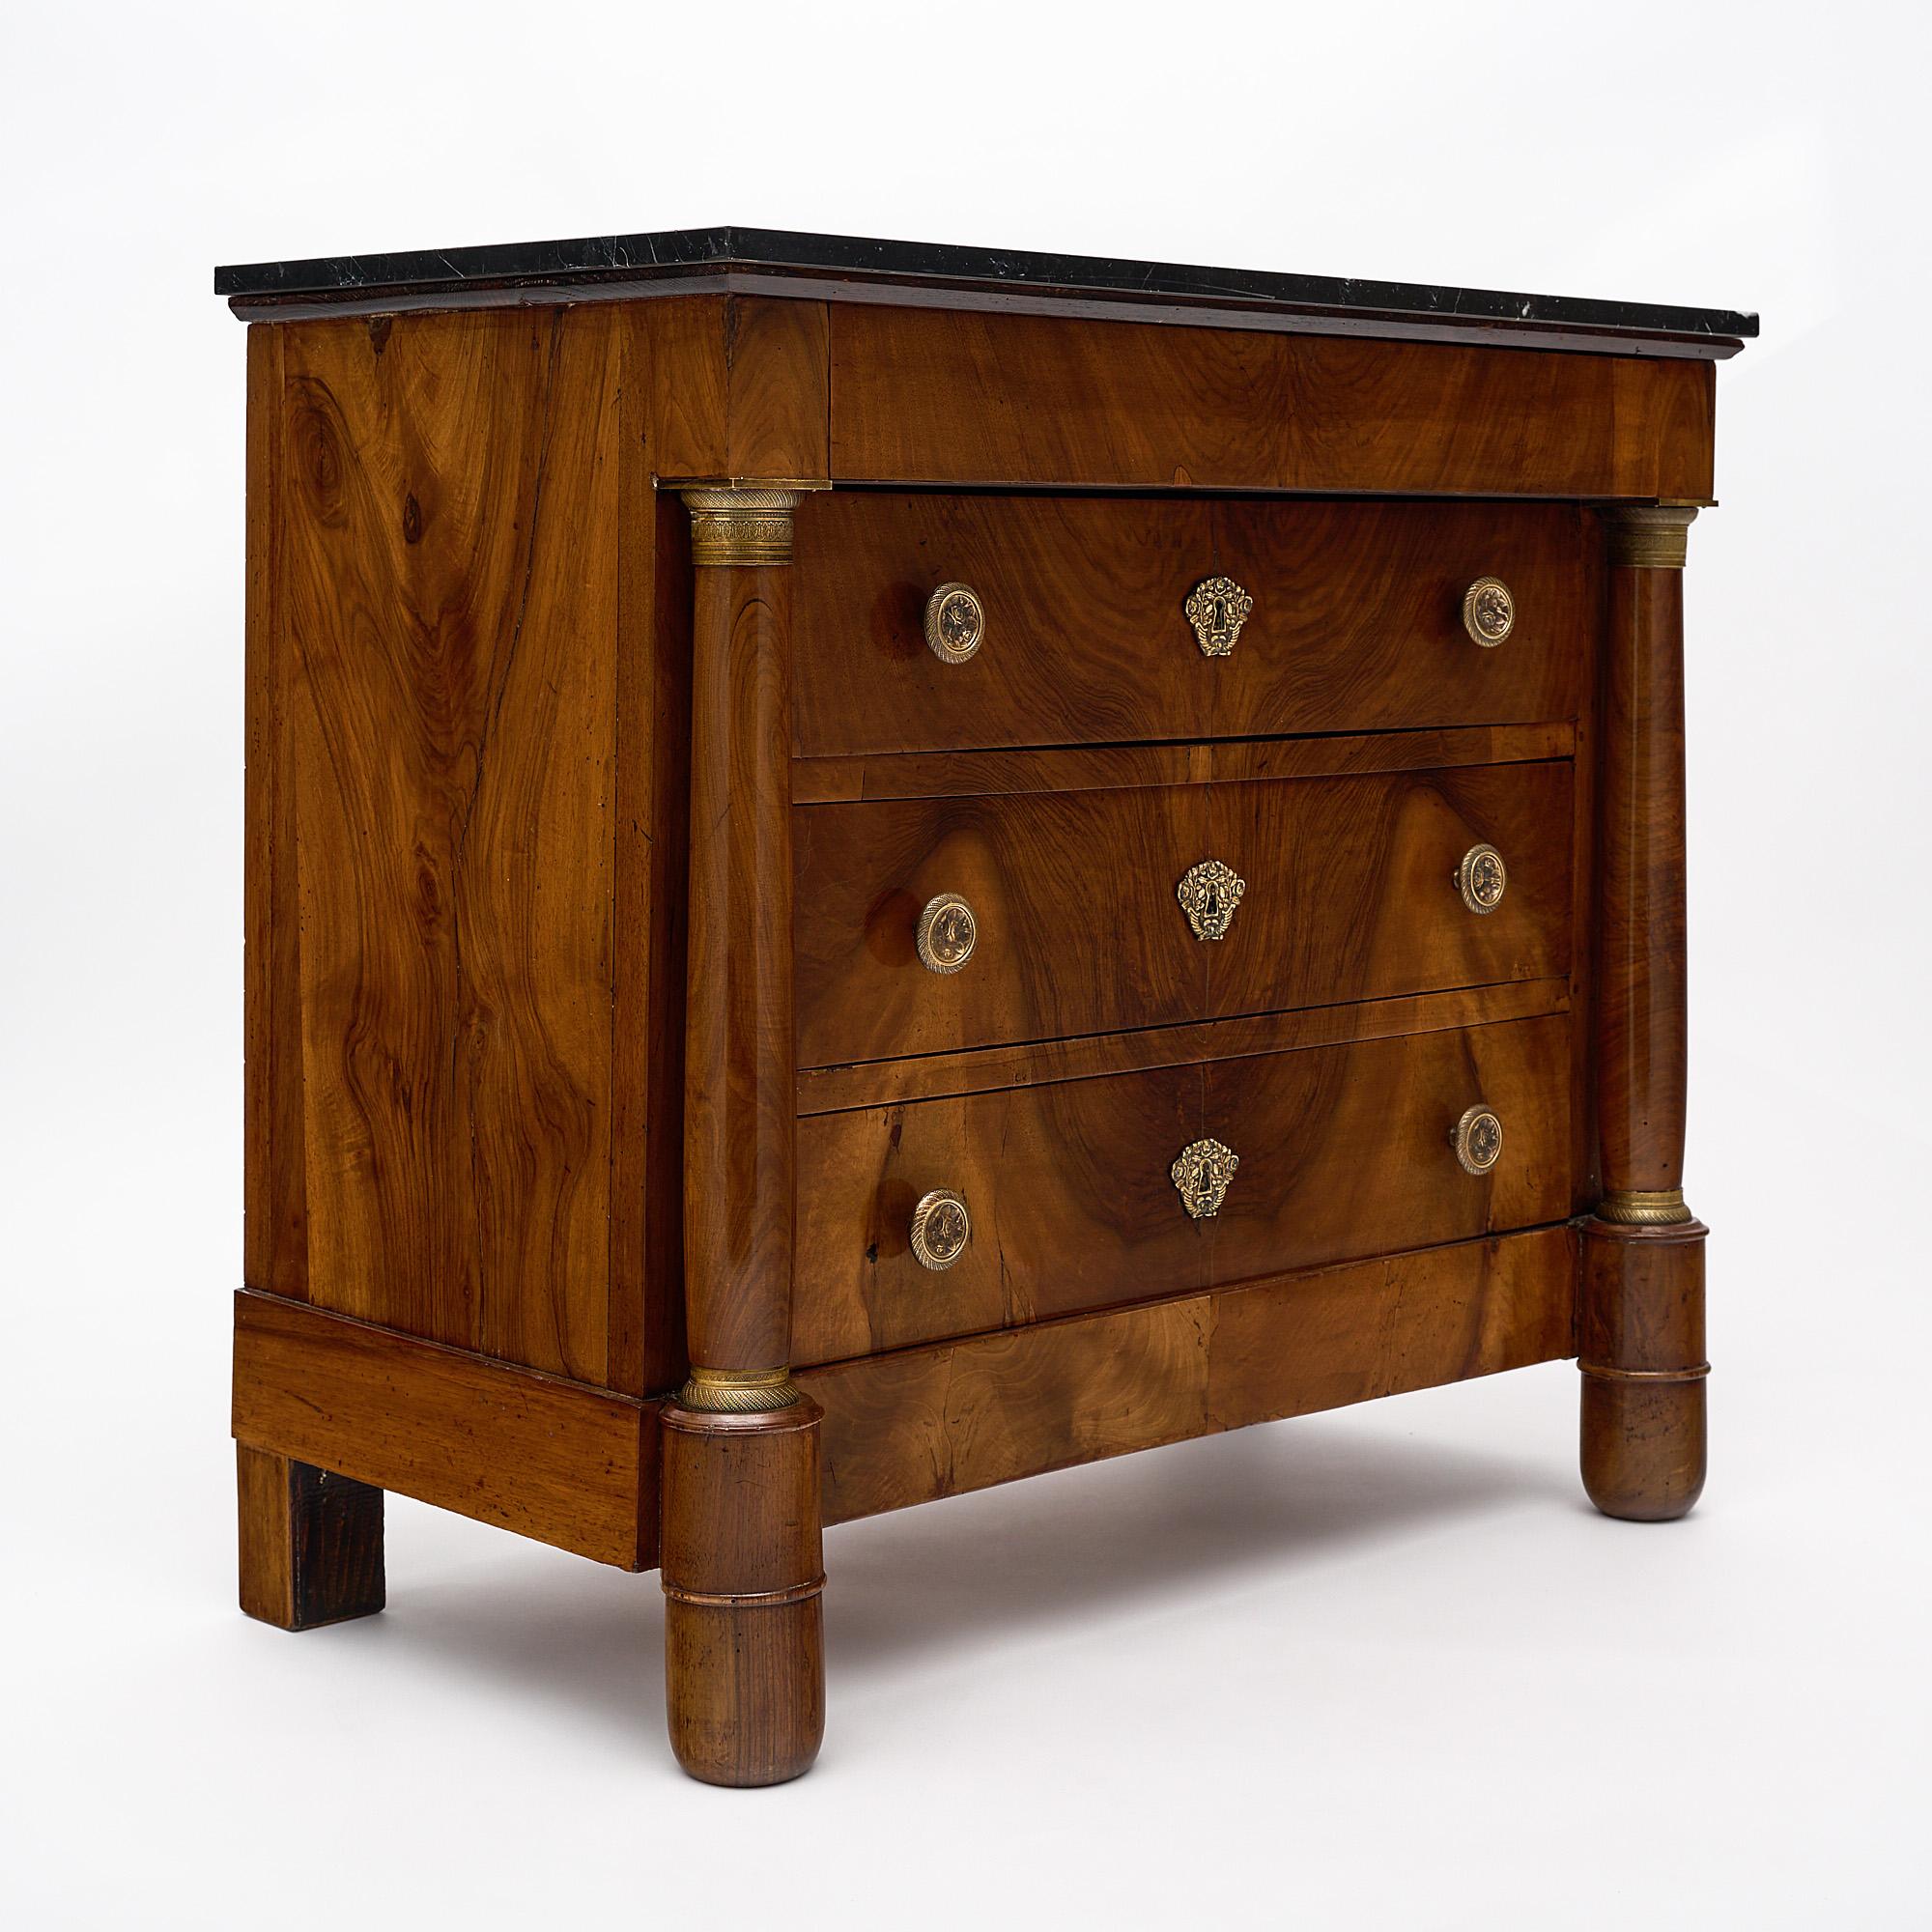 Chest of drawers, French, from the Rhone Valley. This Empire period piece is made of solid figured walnut. The solidly crafted cabinet features four dovetailed drawers with original finely cast bronze hardware. The detached columns are typical of